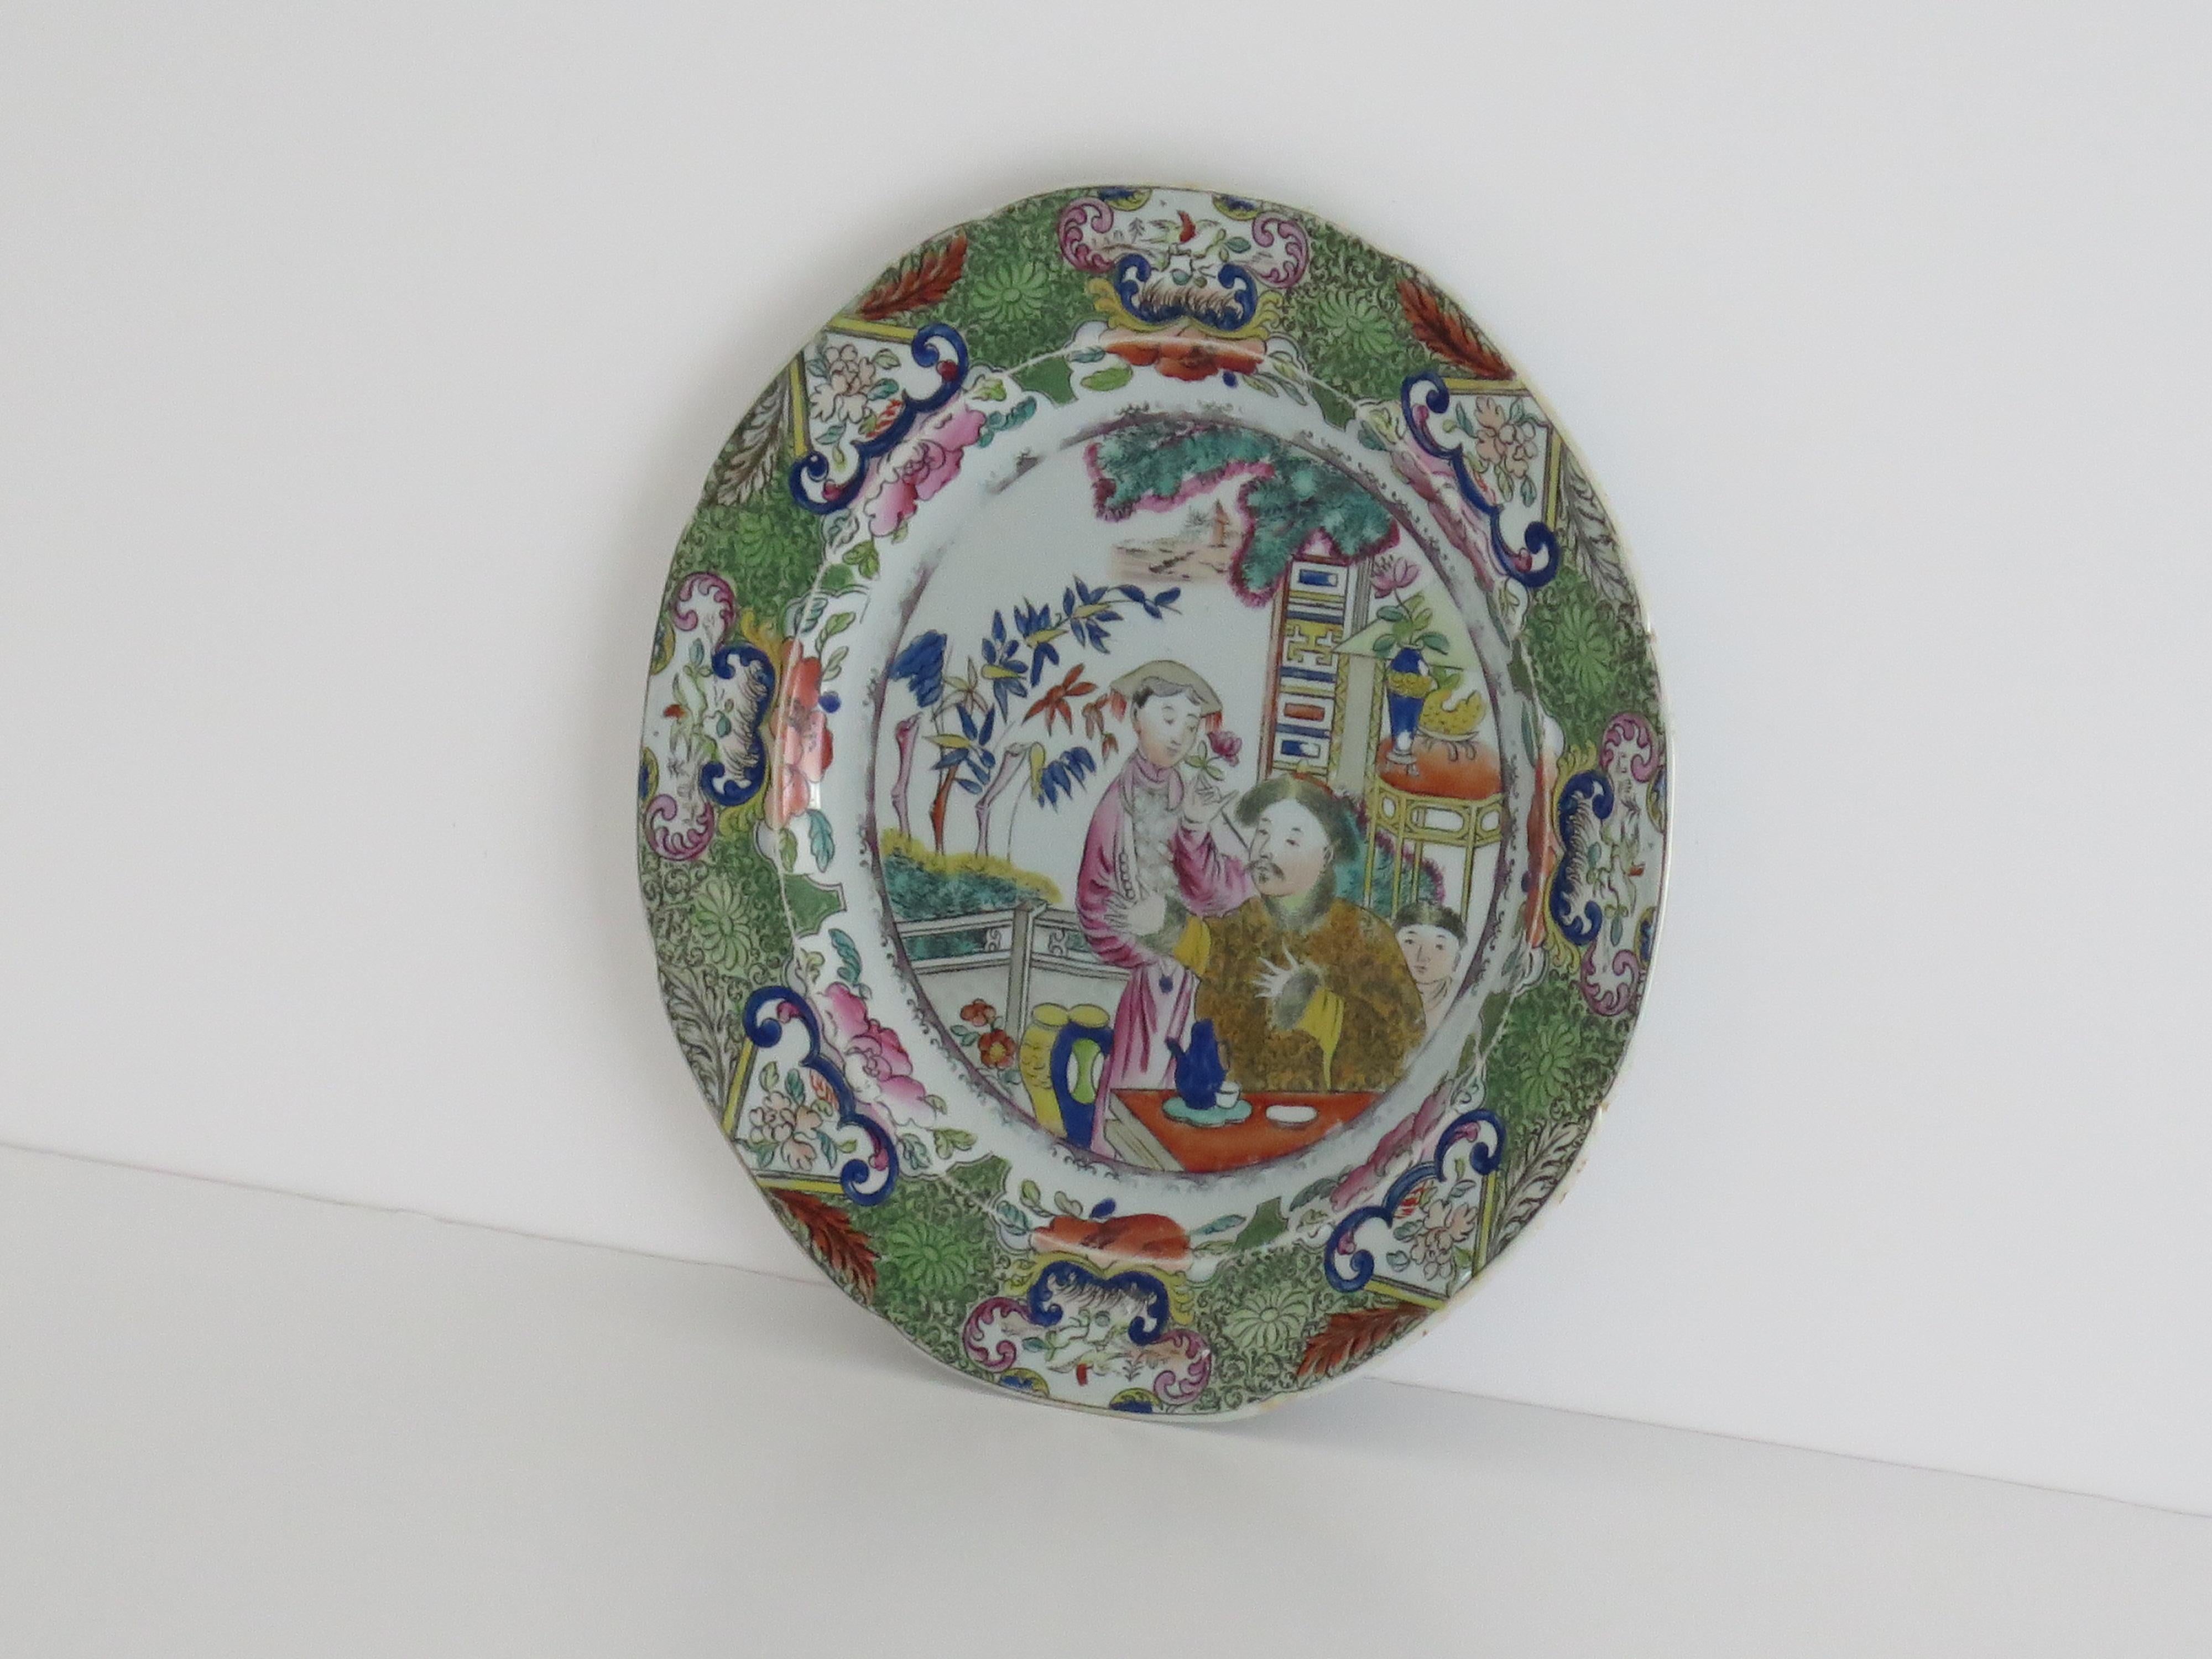 This is a very good early Mason's Ironstone pottery side plate, finely hand painted in the very decorative Mandarin pattern, produced by the Mason's factory at Lane Delph, Staffordshire, England, in the George 111rd period, circa 1813-1820.

The